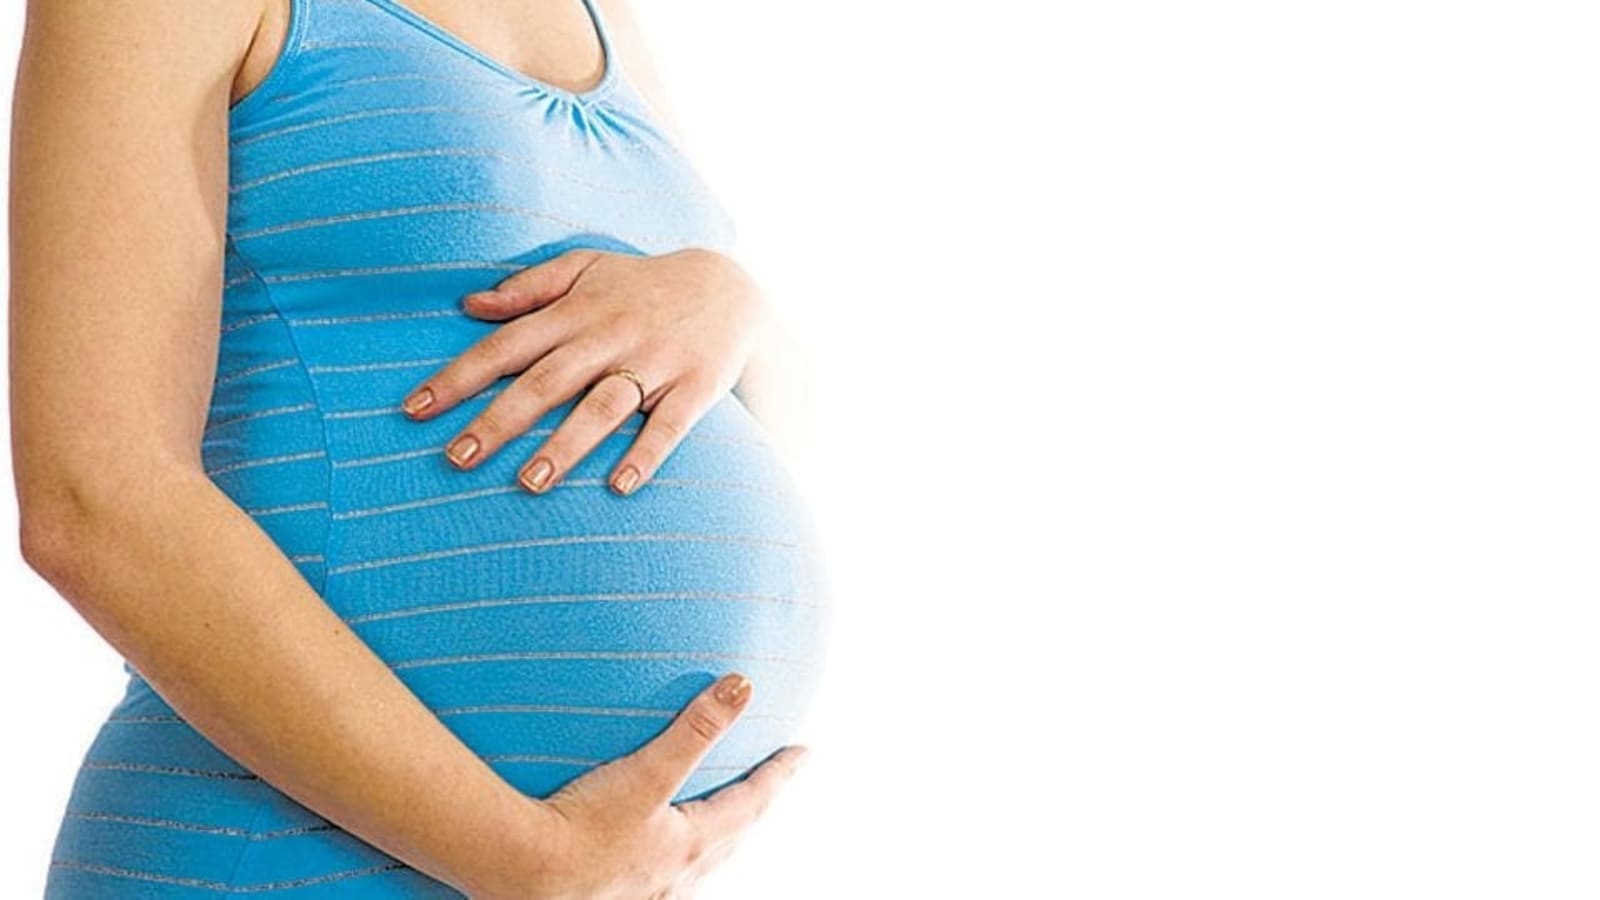 Immune system can detect disease during pregnancy: Study | Health